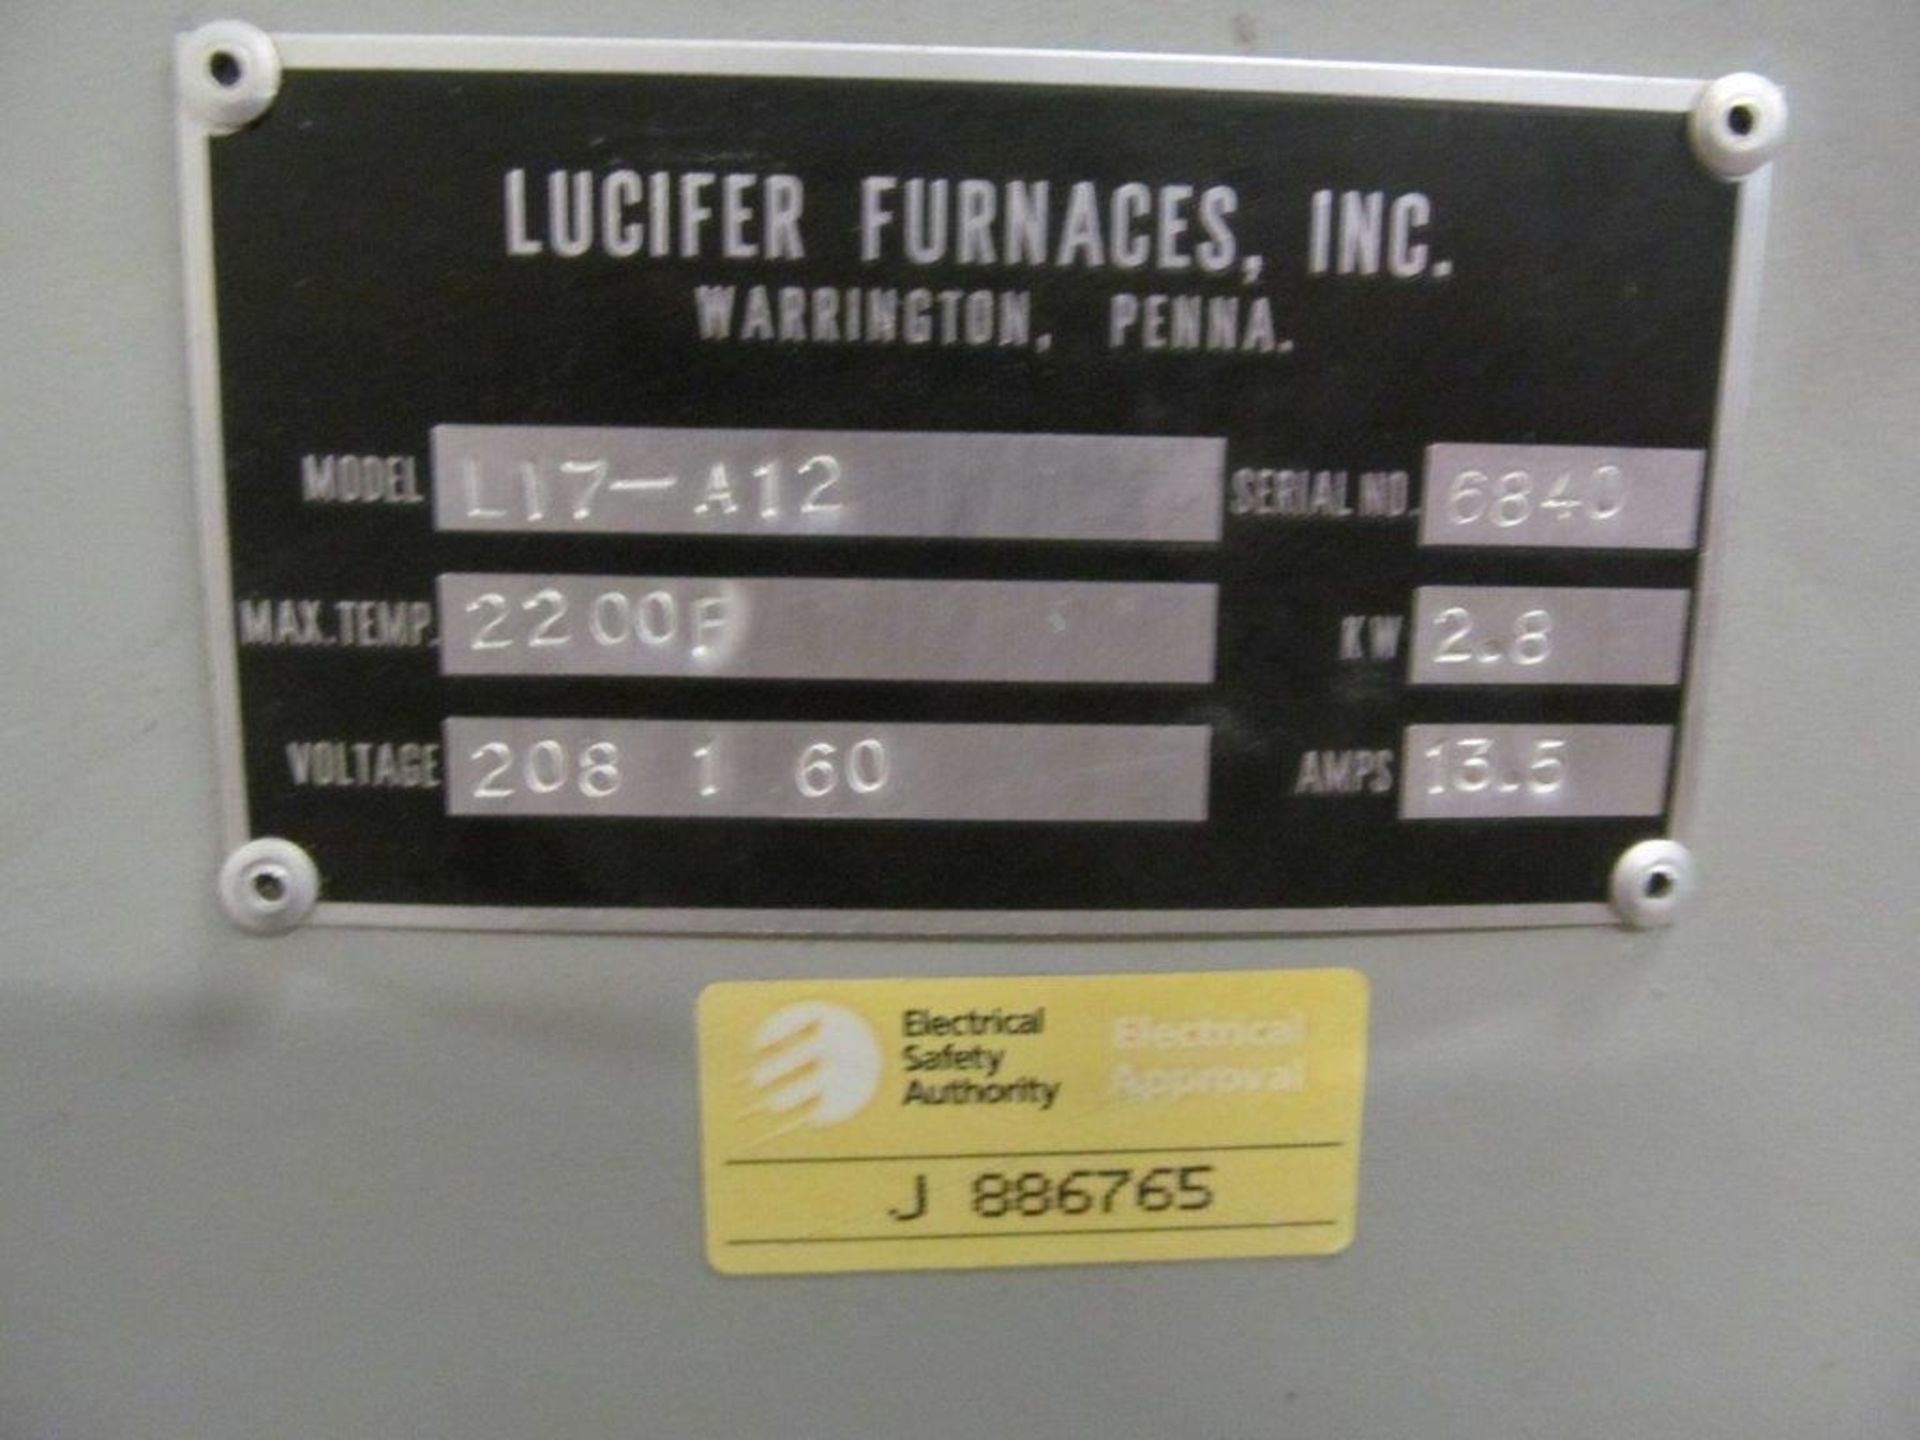 LUCIFER FURNACES INC. FURNACE, MODEL L17-A12, - LOCATION - HAWKESBURY, ONTARIO - Image 4 of 6